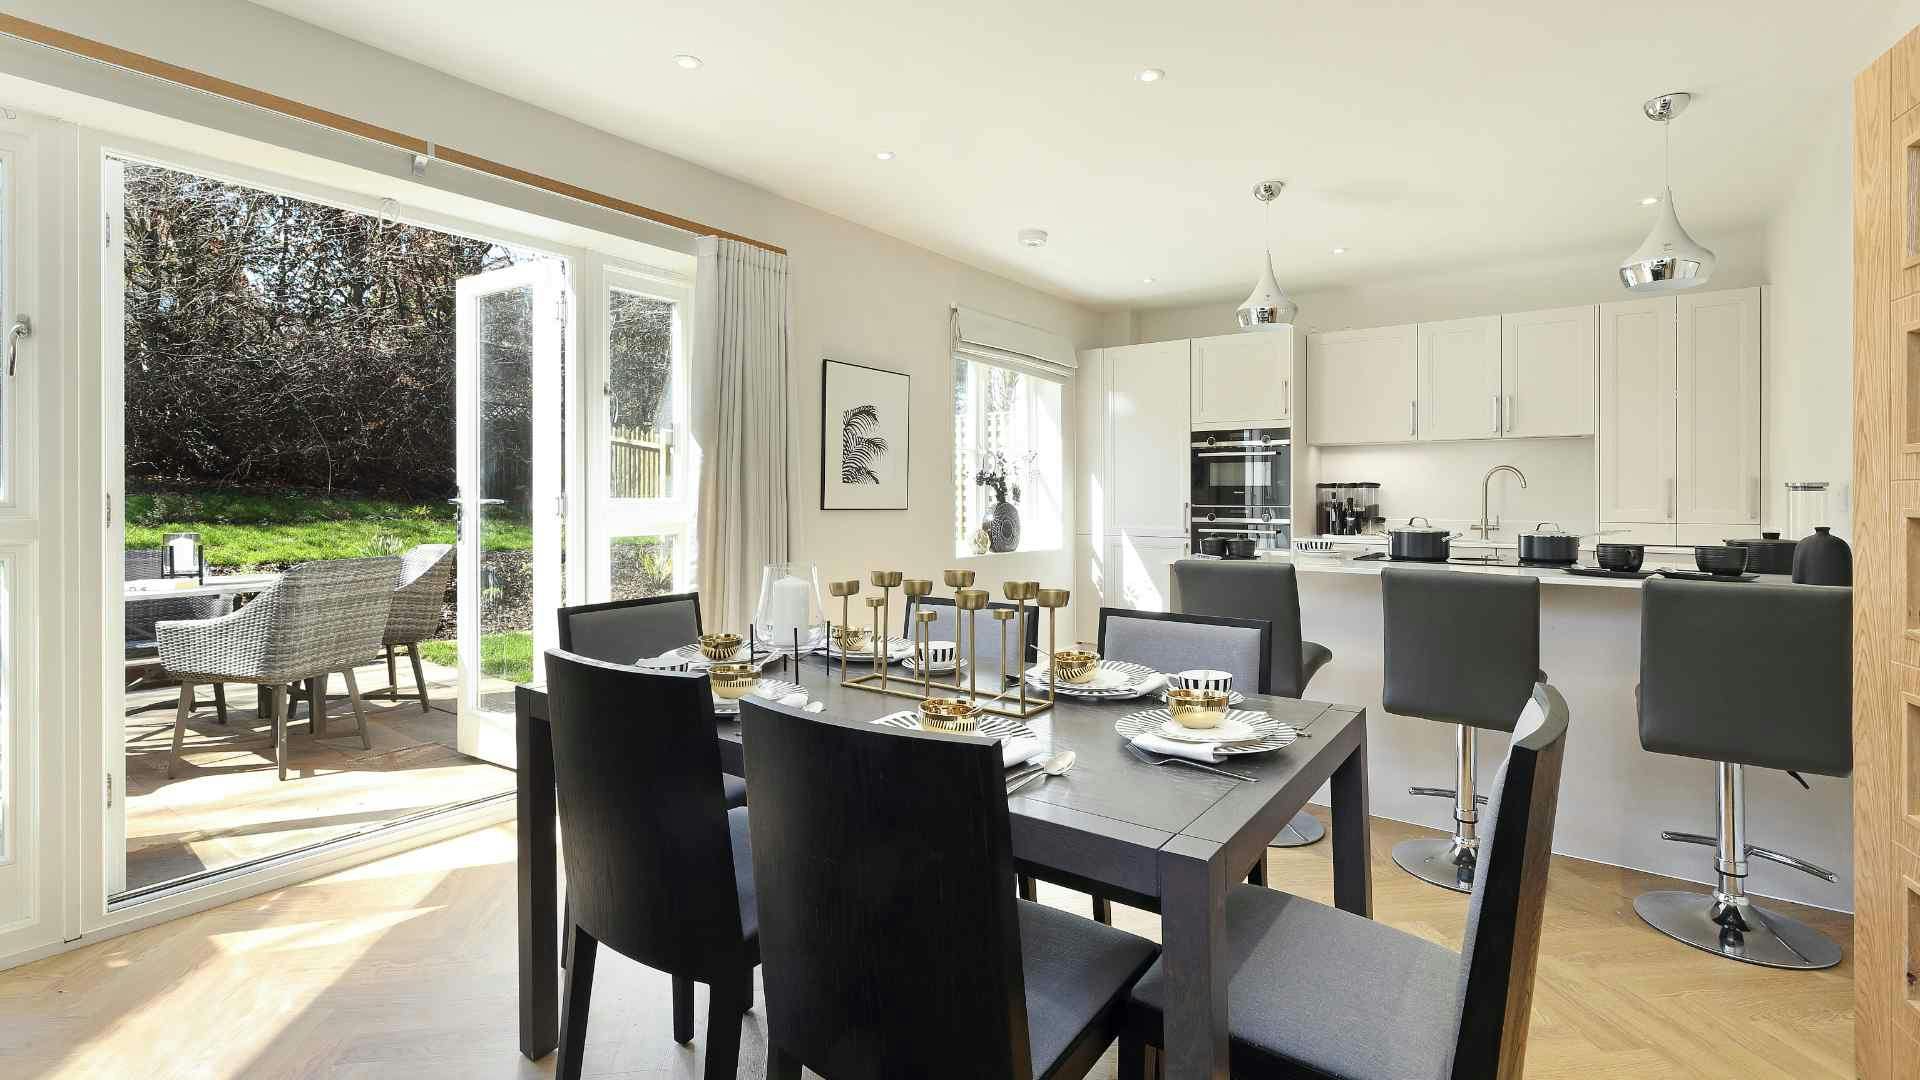 Dining area of Redclyffe Place retirement development in Harpenden, Hertfordshire